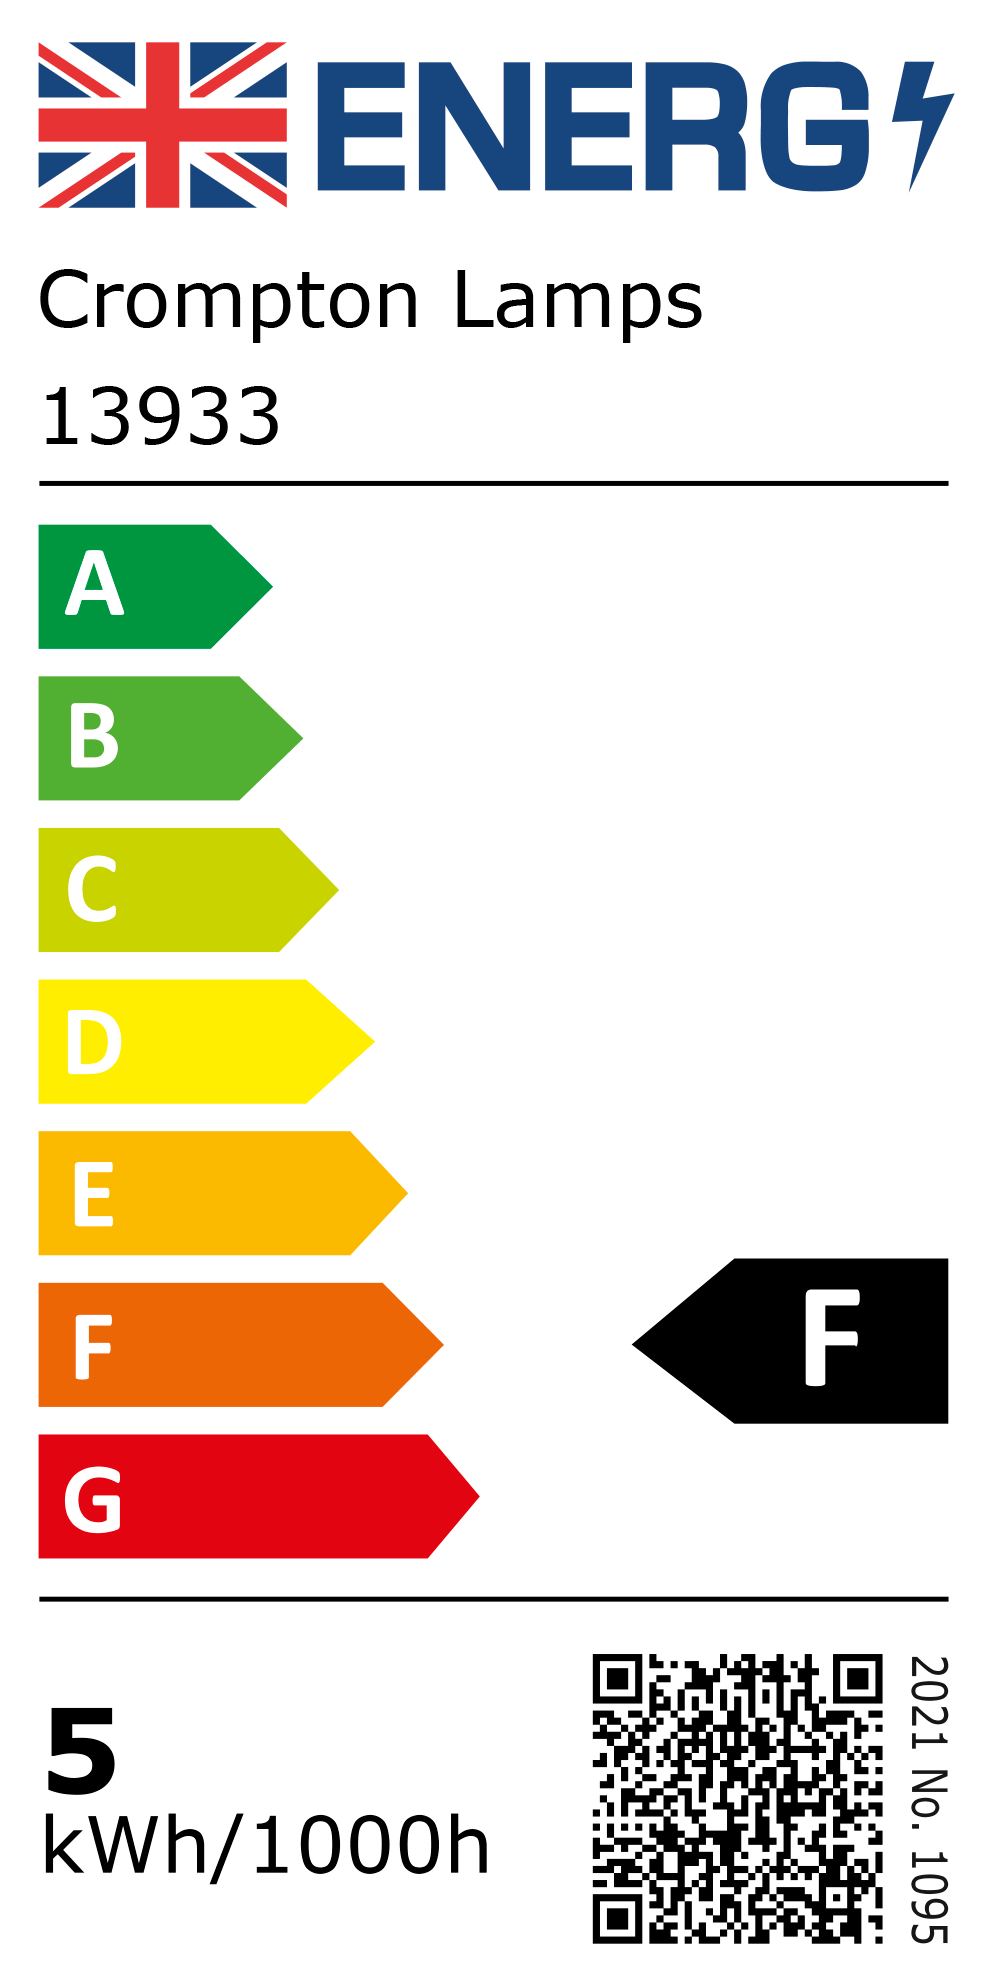 New 2021 Energy Rating Label: Stock Code 13933